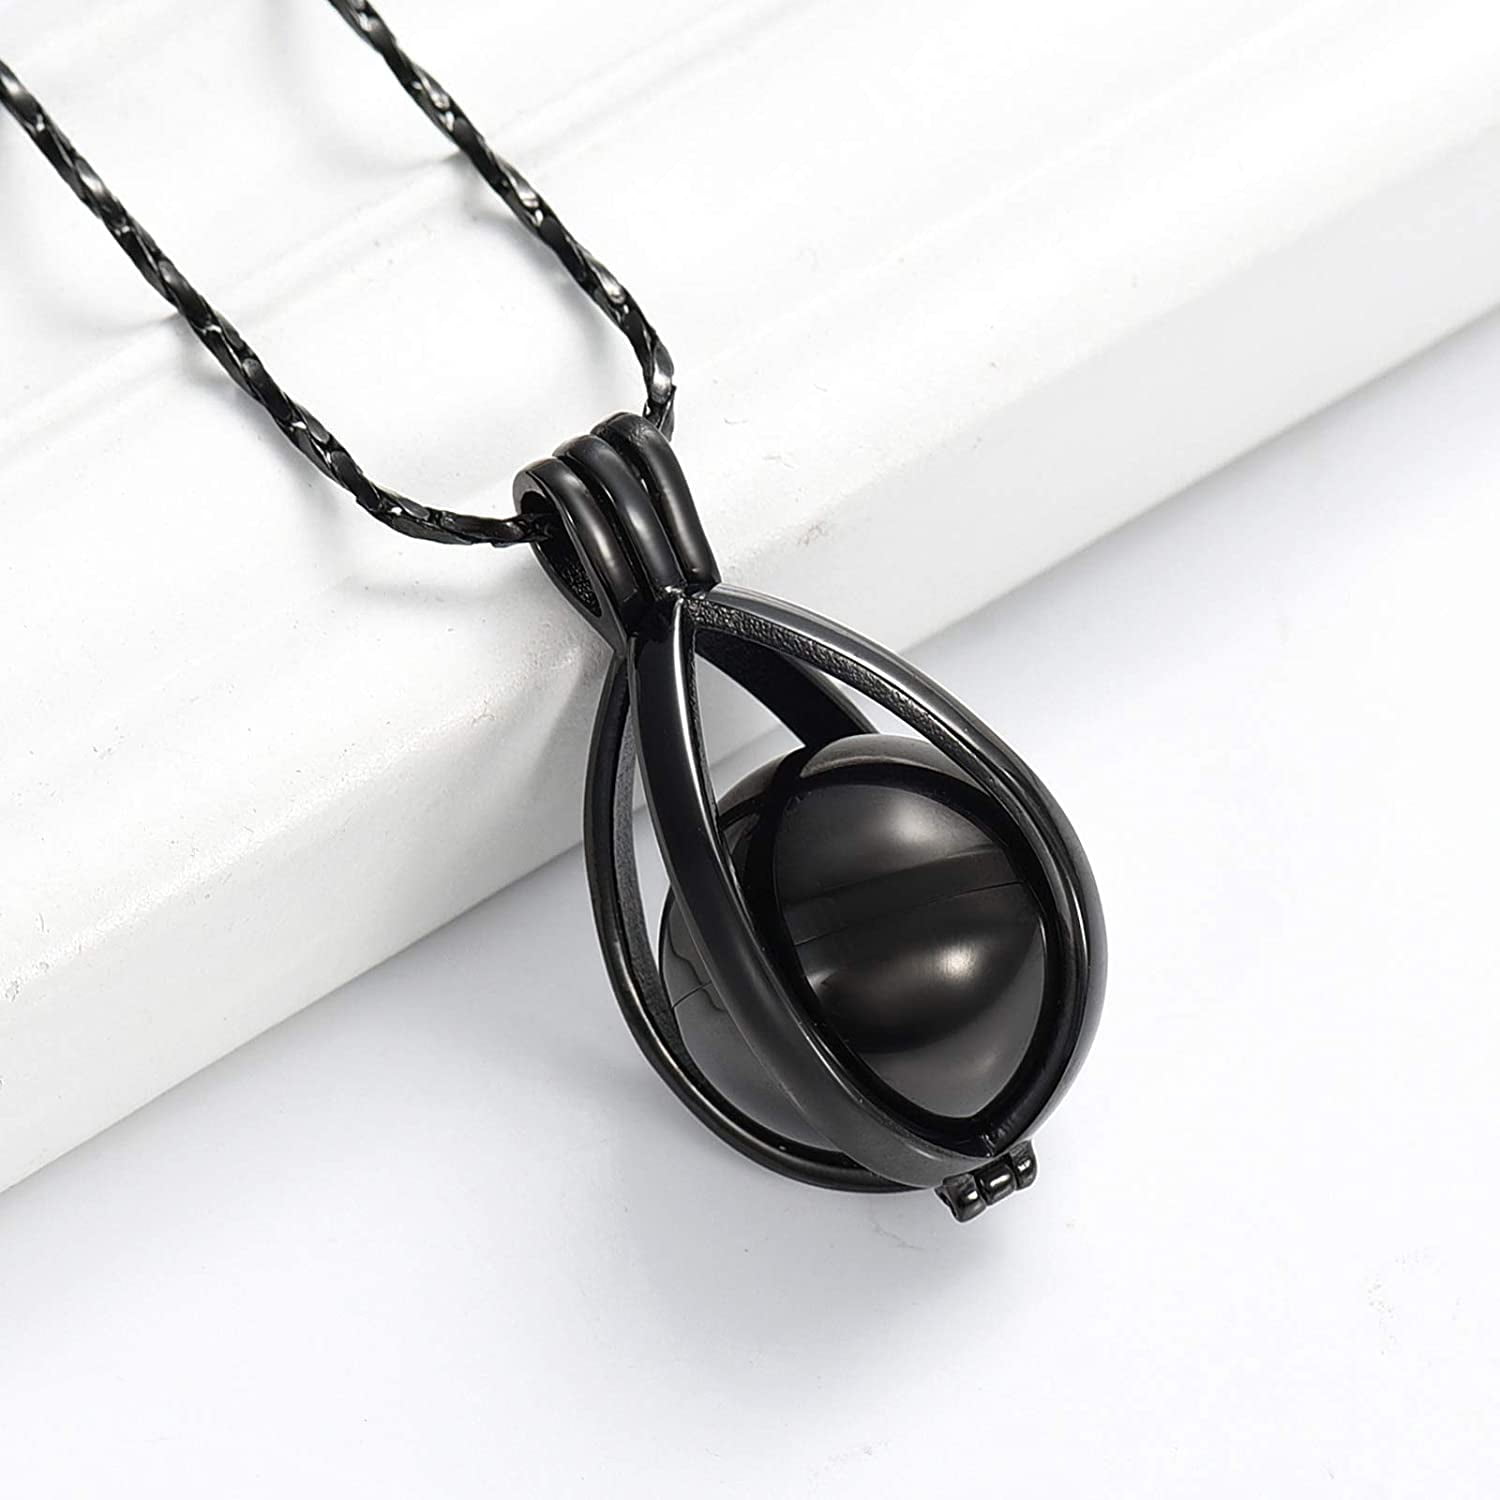 PERSONALIZED TEARDROP SHAPE of Waterdrop Cremation Urn Necklace with  Fill7840 £5.04 - PicClick UK